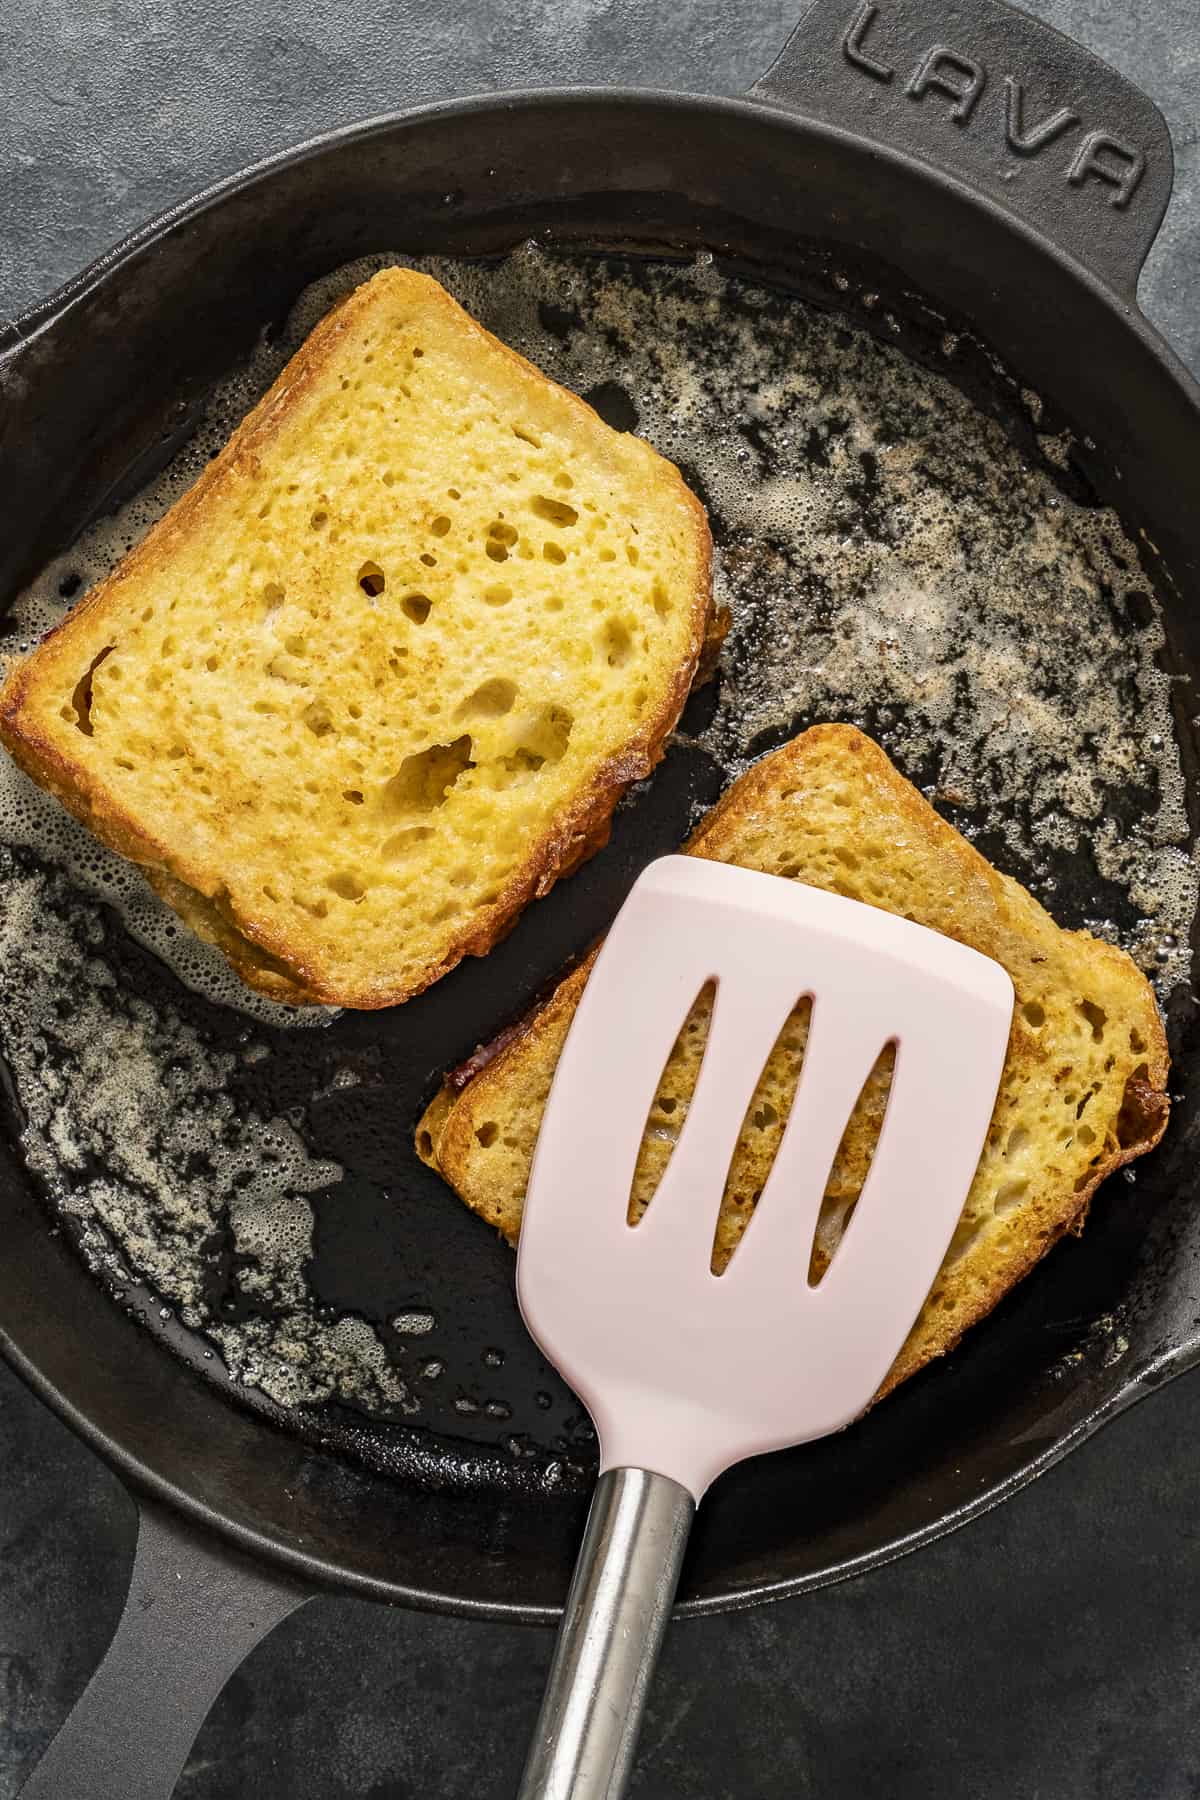 A spatula pressing on a slice of bread cooking in a pan.